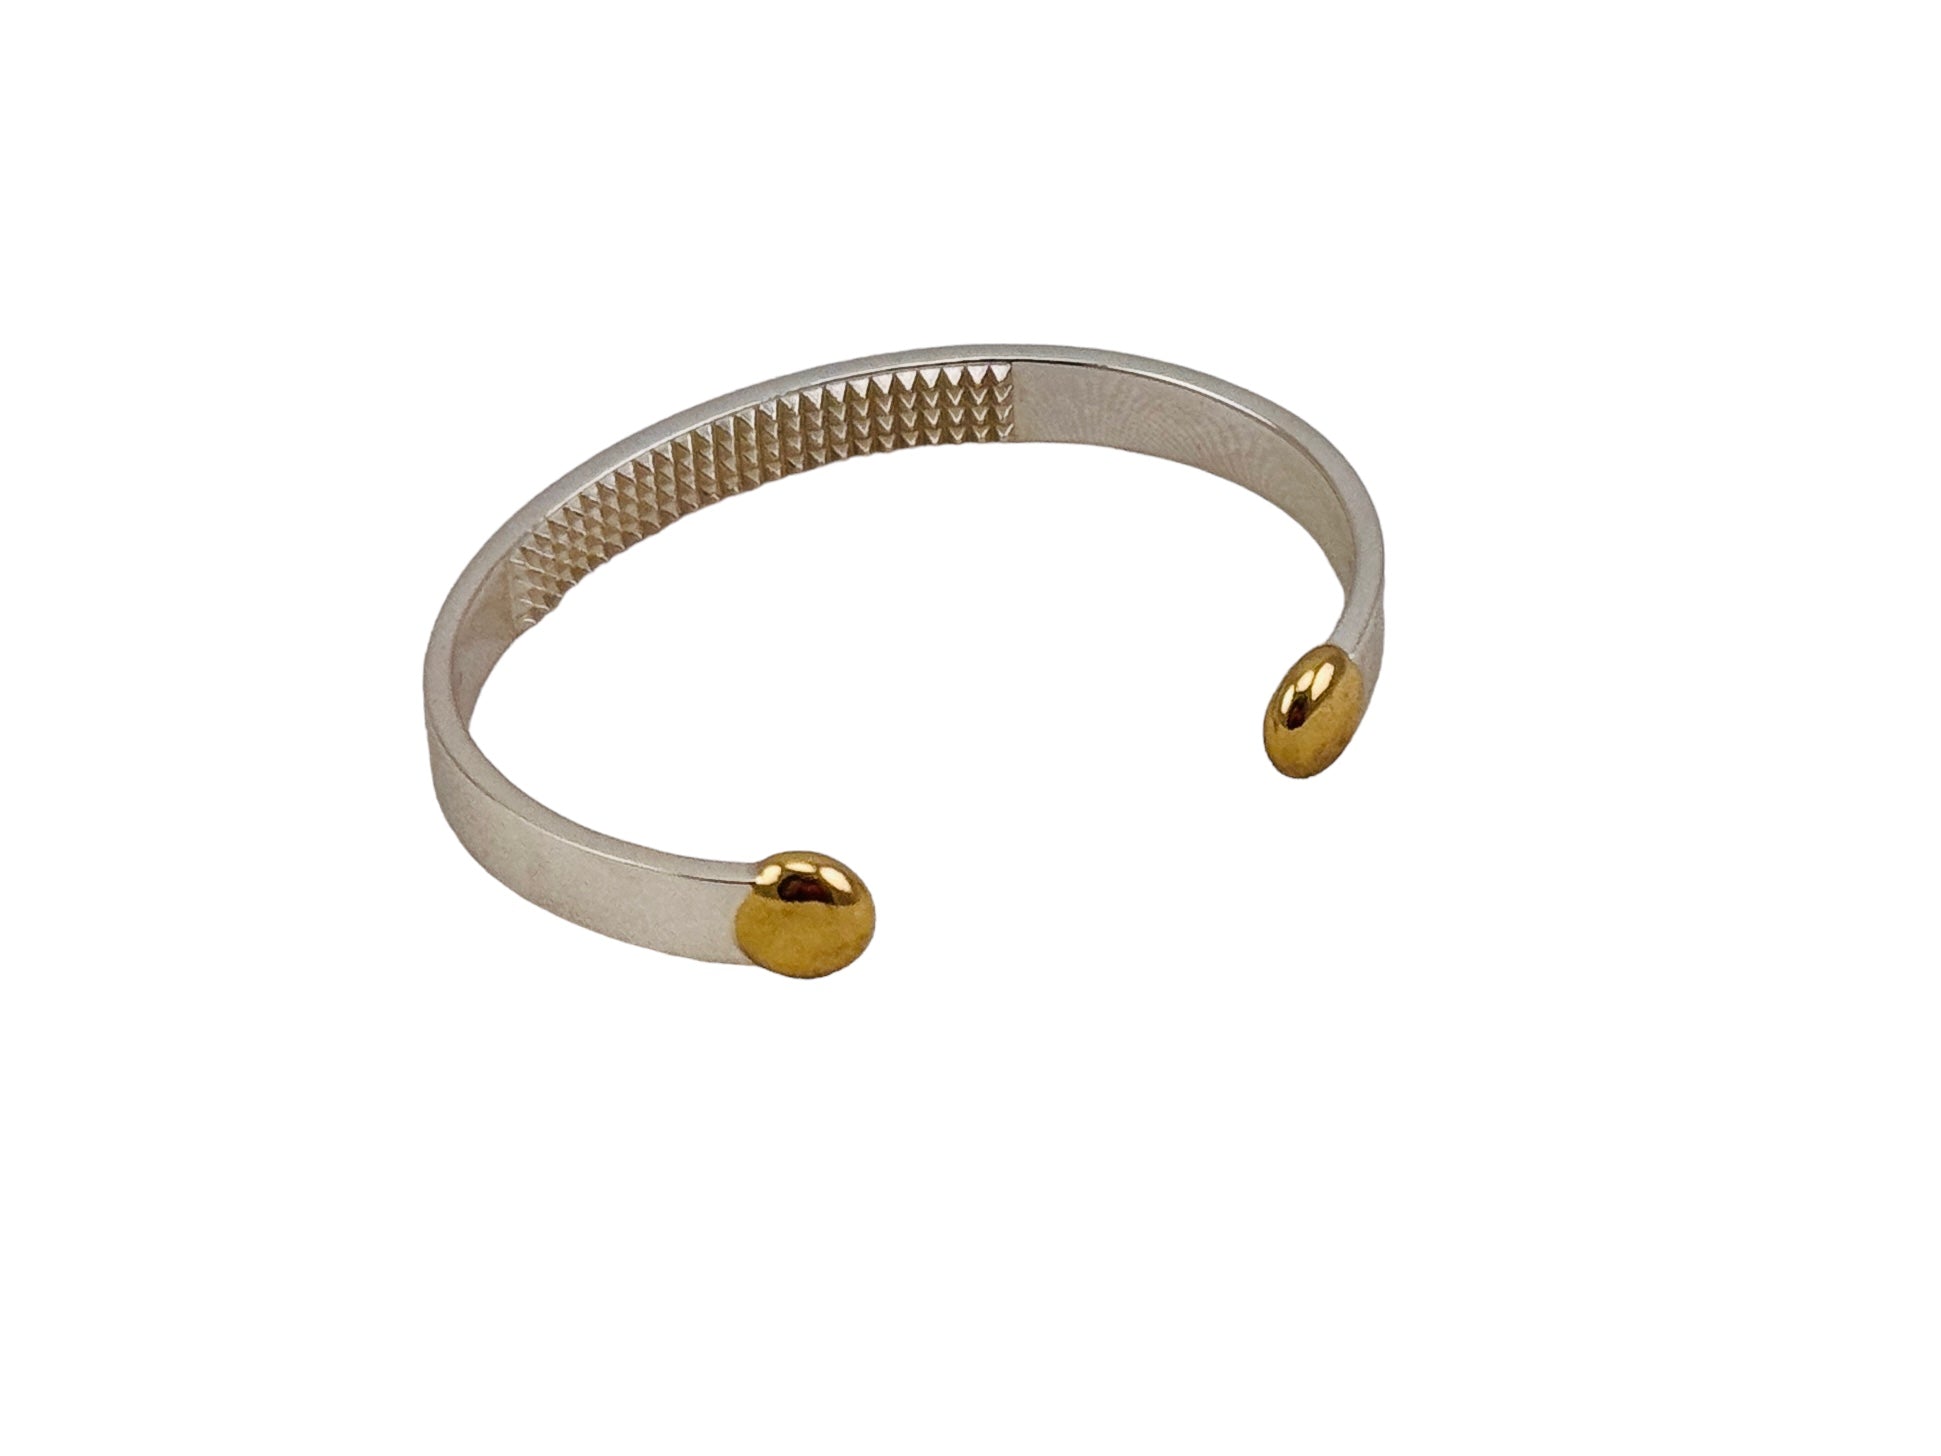 The Star & Co Anxiety Jewellery - The Annika Cuff pictured on a white background